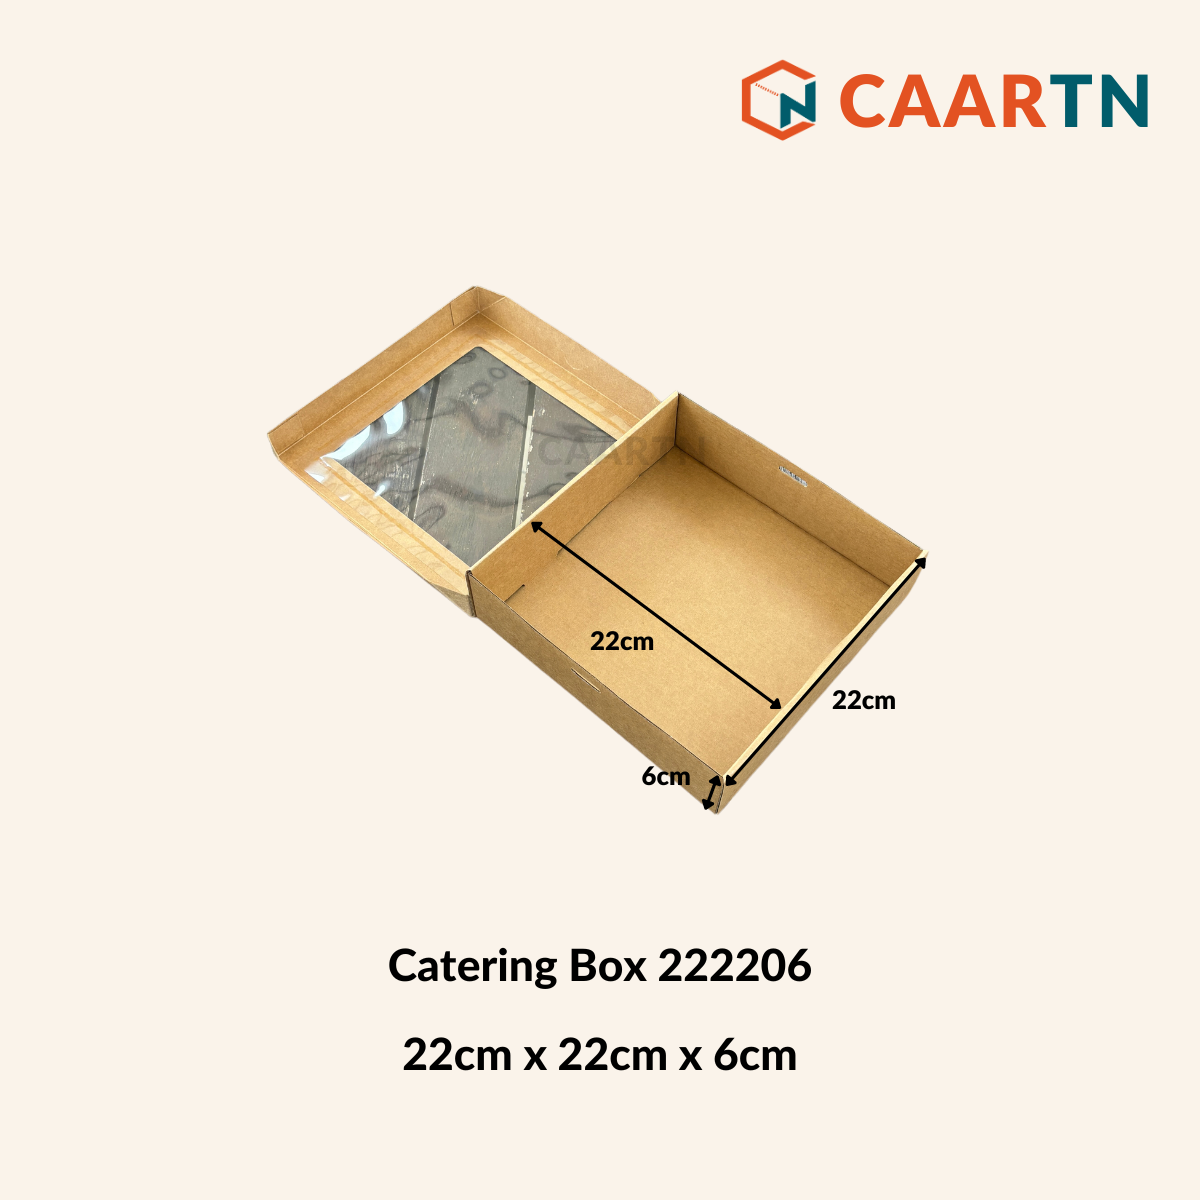 Catering Box 222206